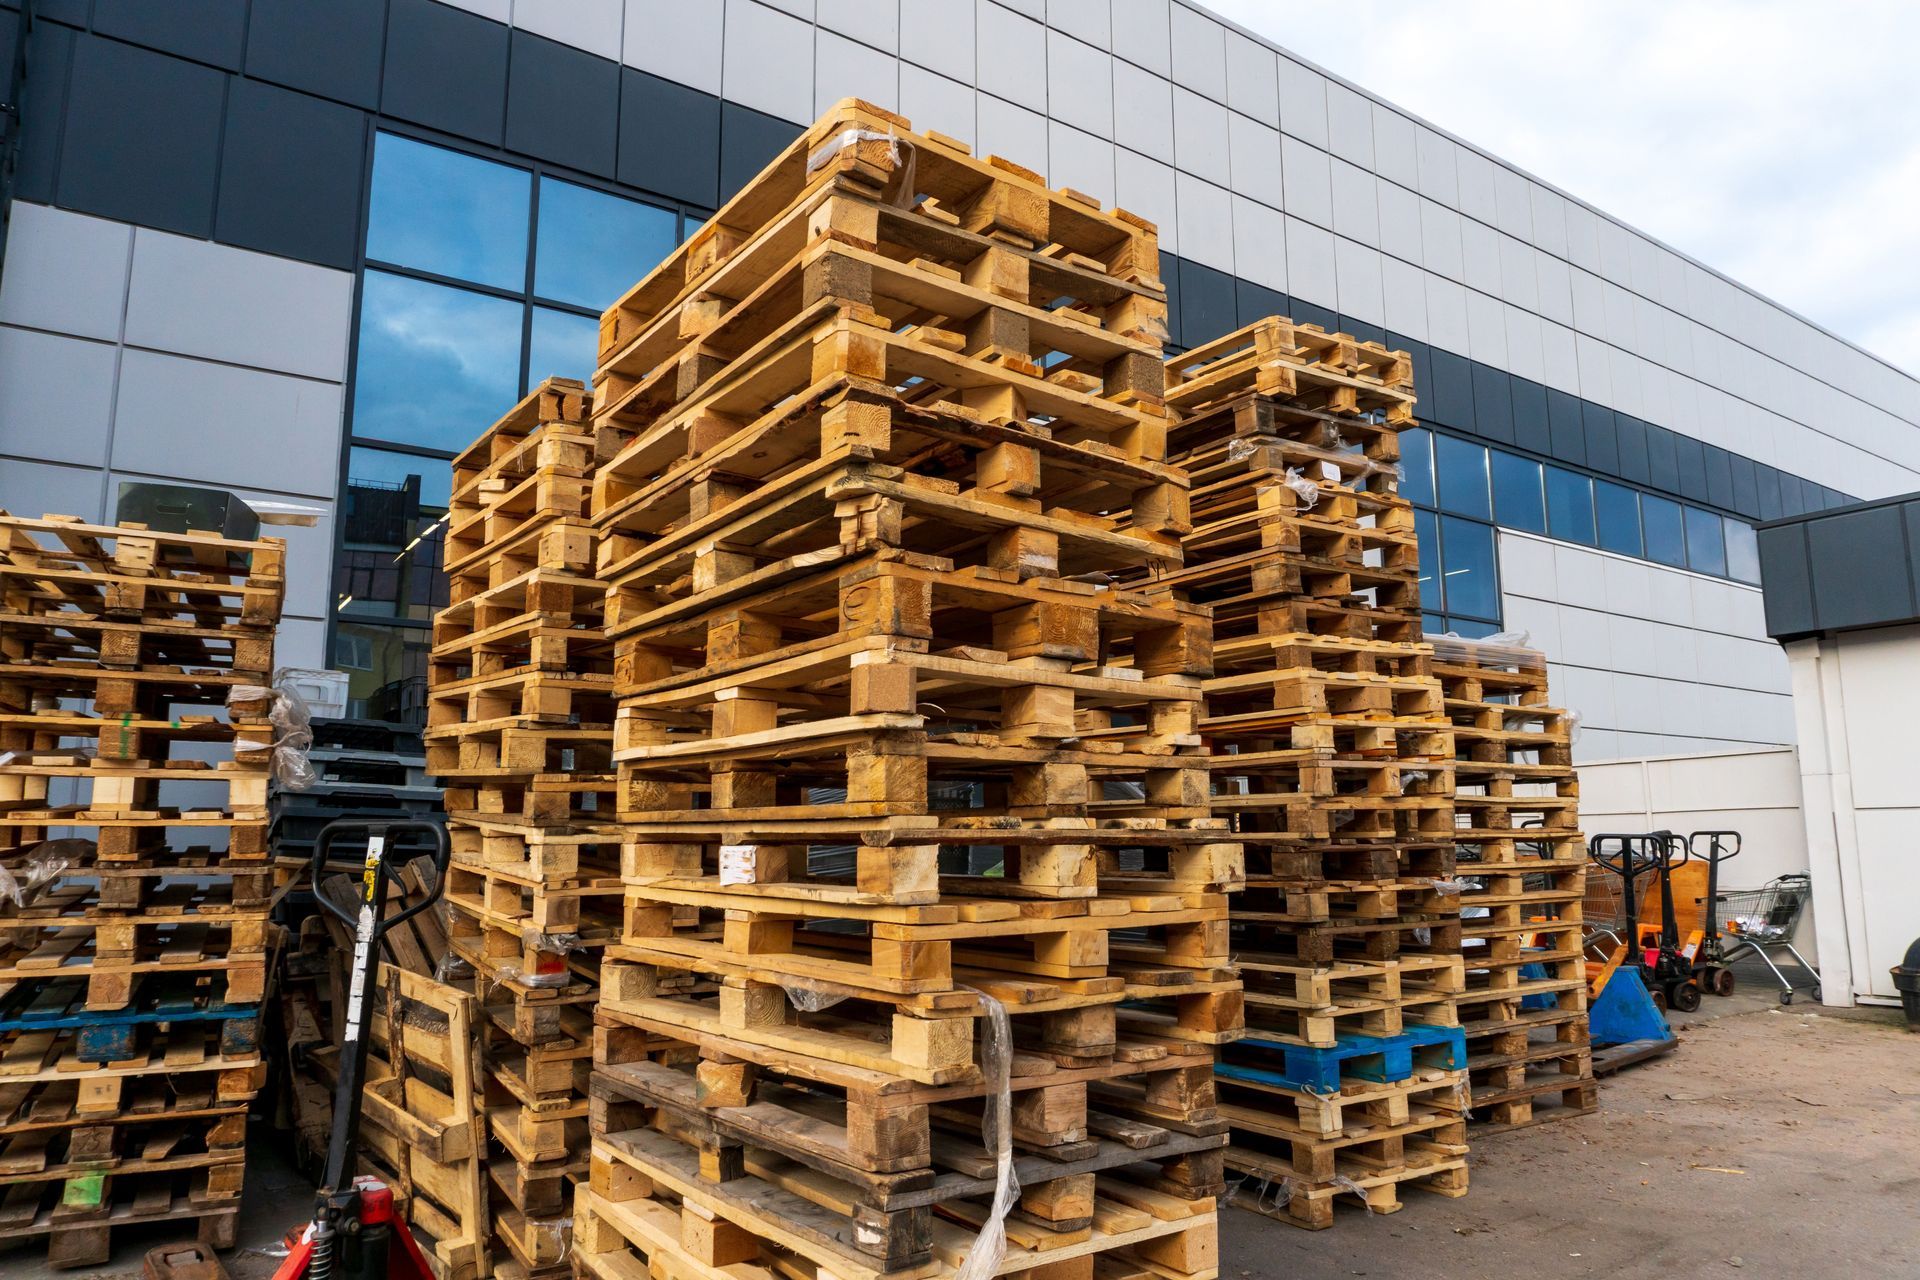 stacks of various types of wooden shipping pallets in front of a building.